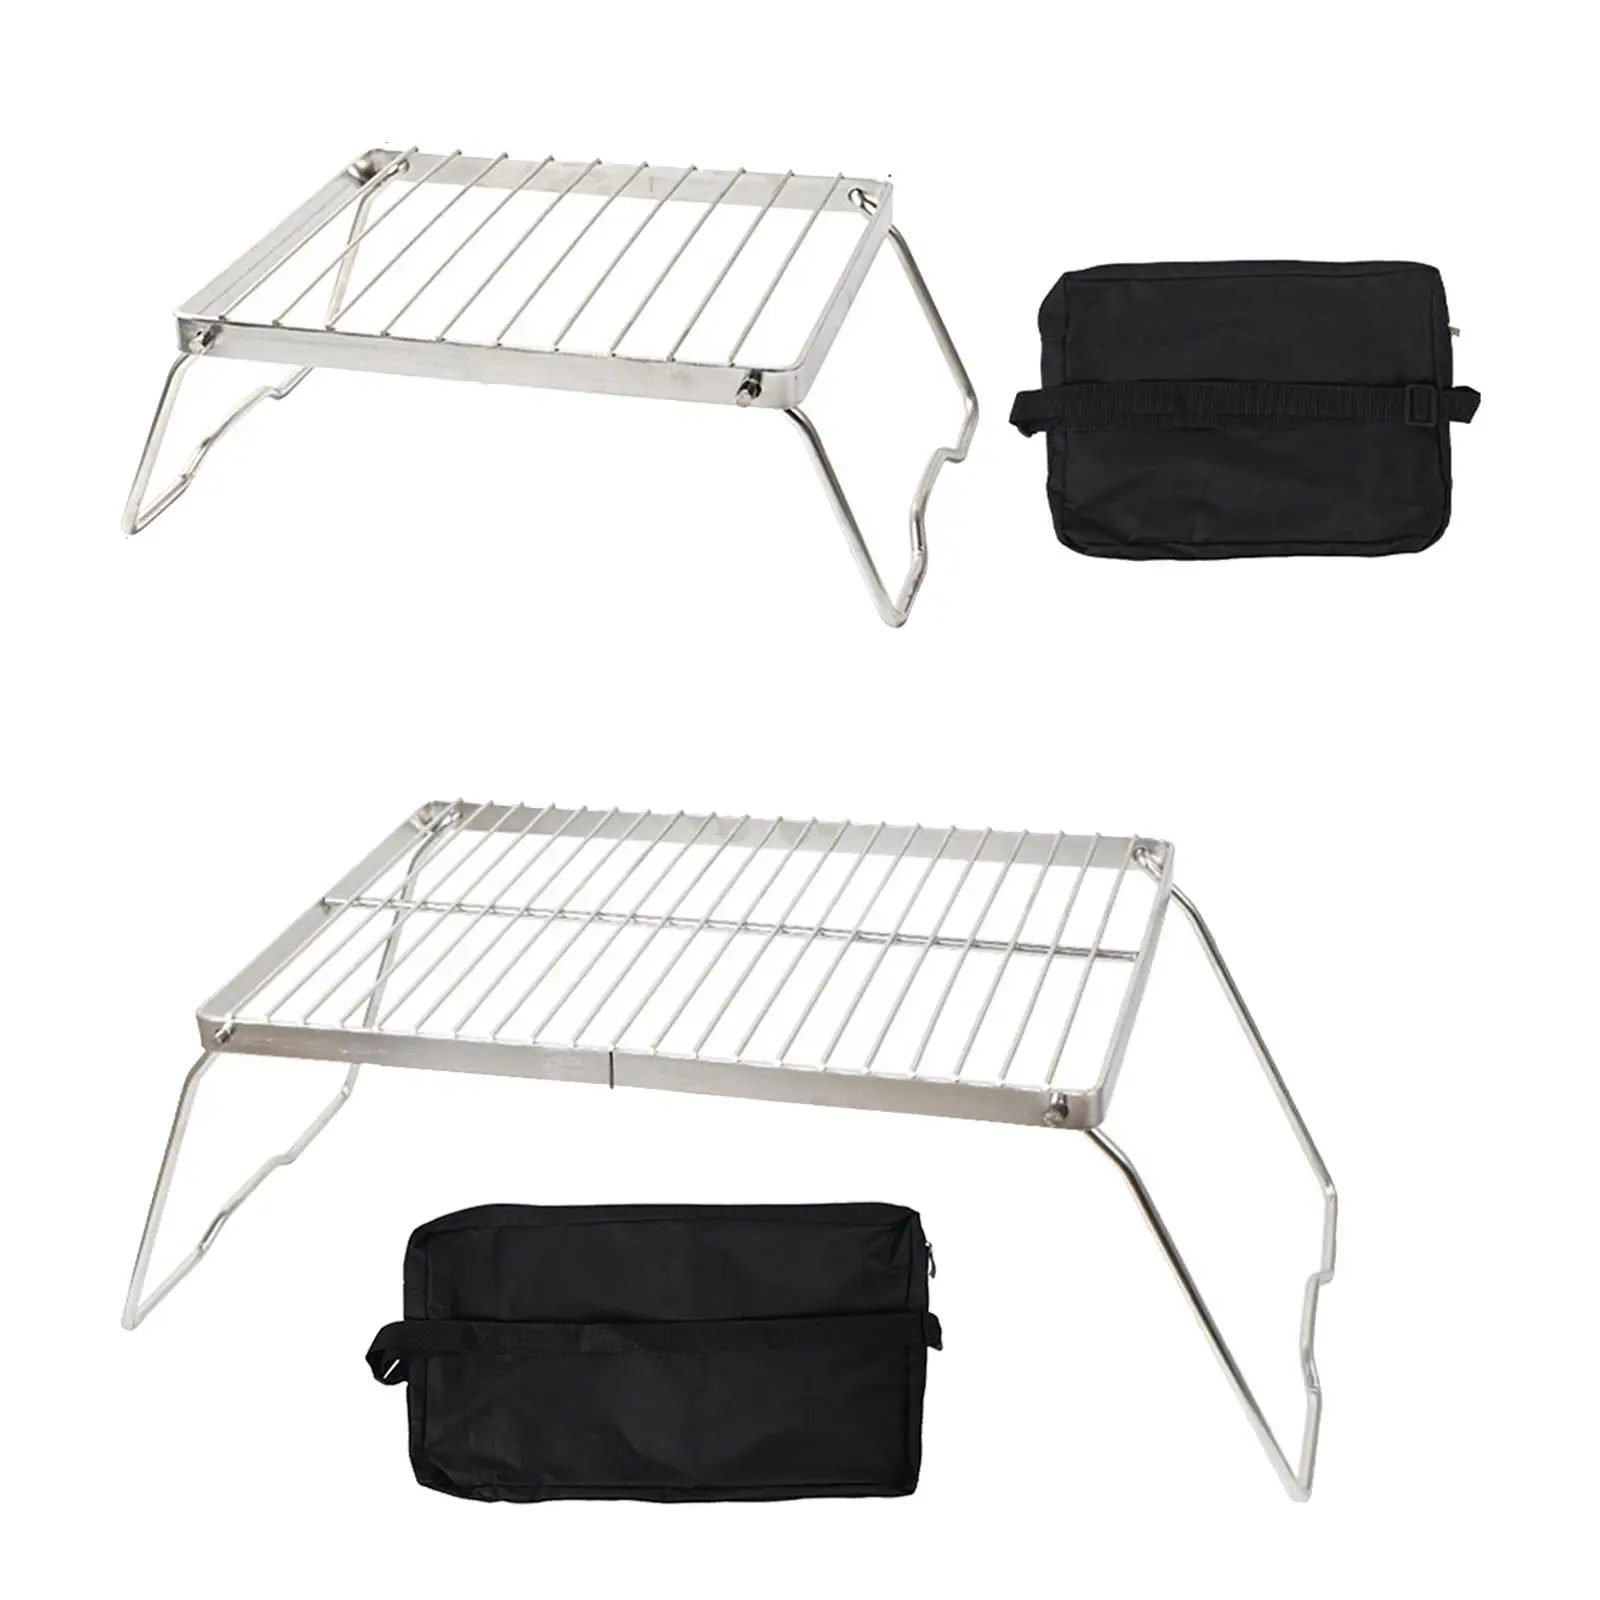 Camping Grill Grate Stainless Steel Multifunctional Portable Folding Grill Rack Gas Stoves Burner Bracket for Camping Home